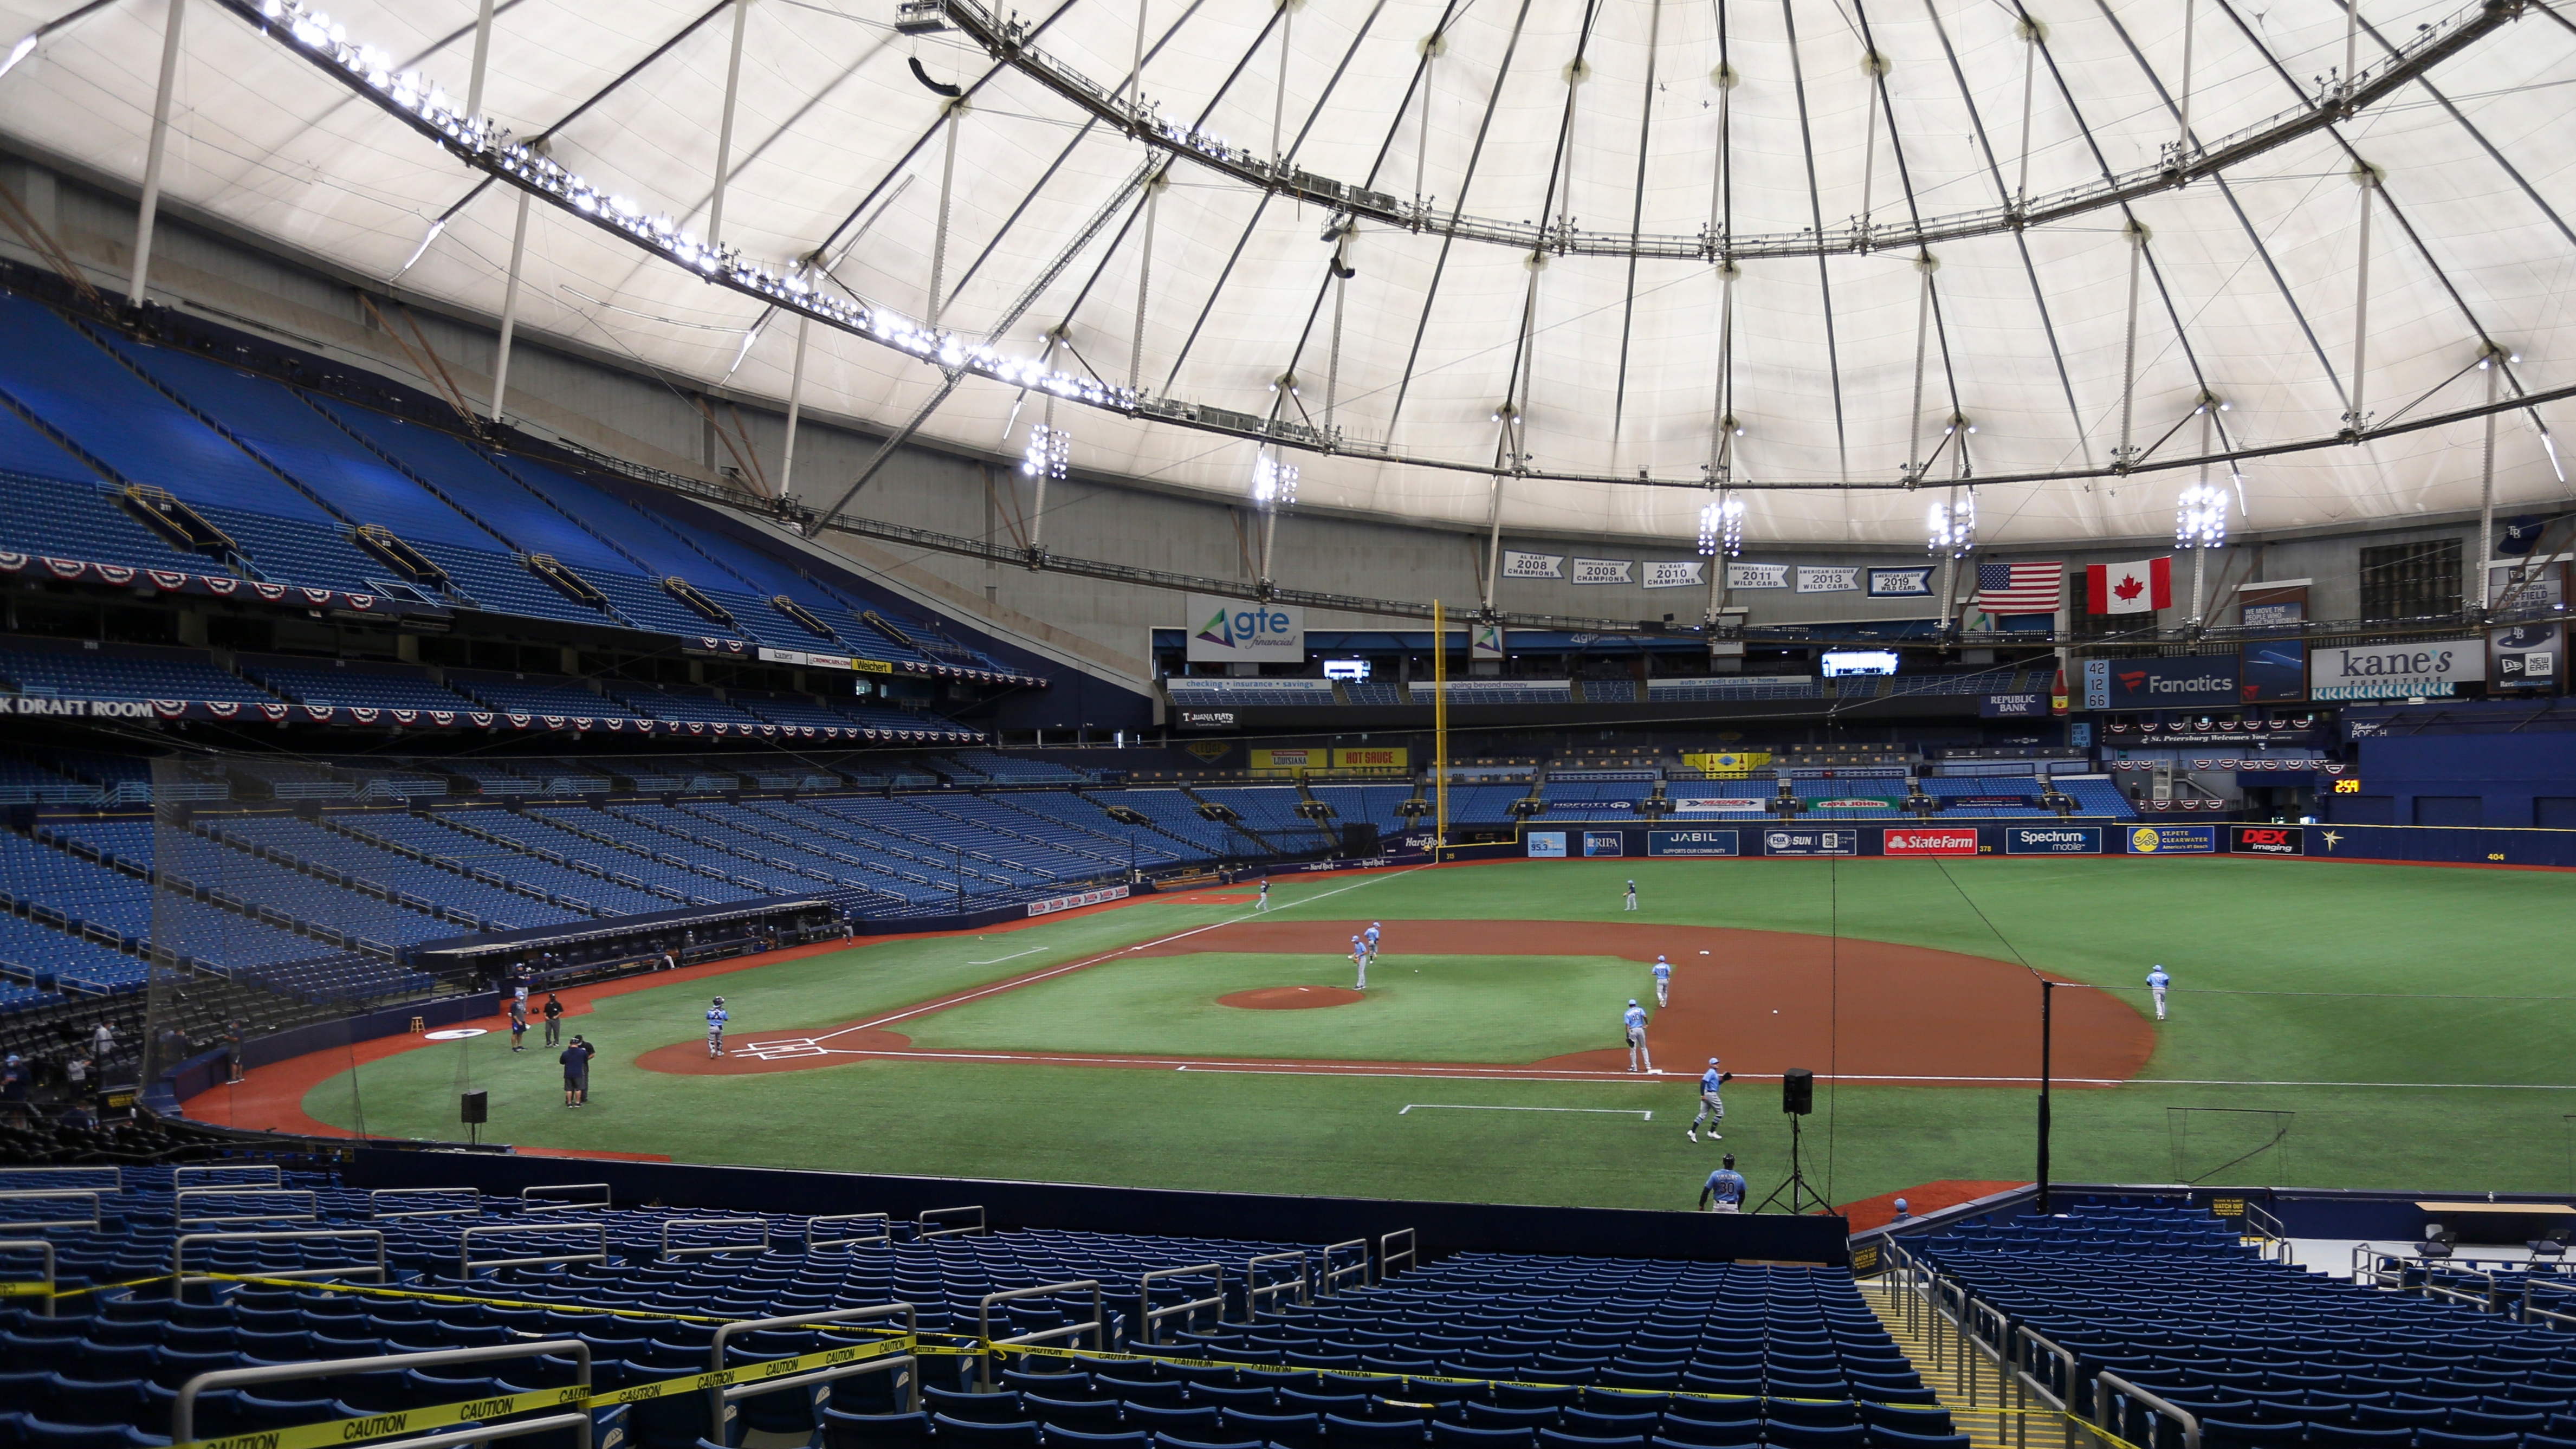 Rays 2020 Opening Day roster